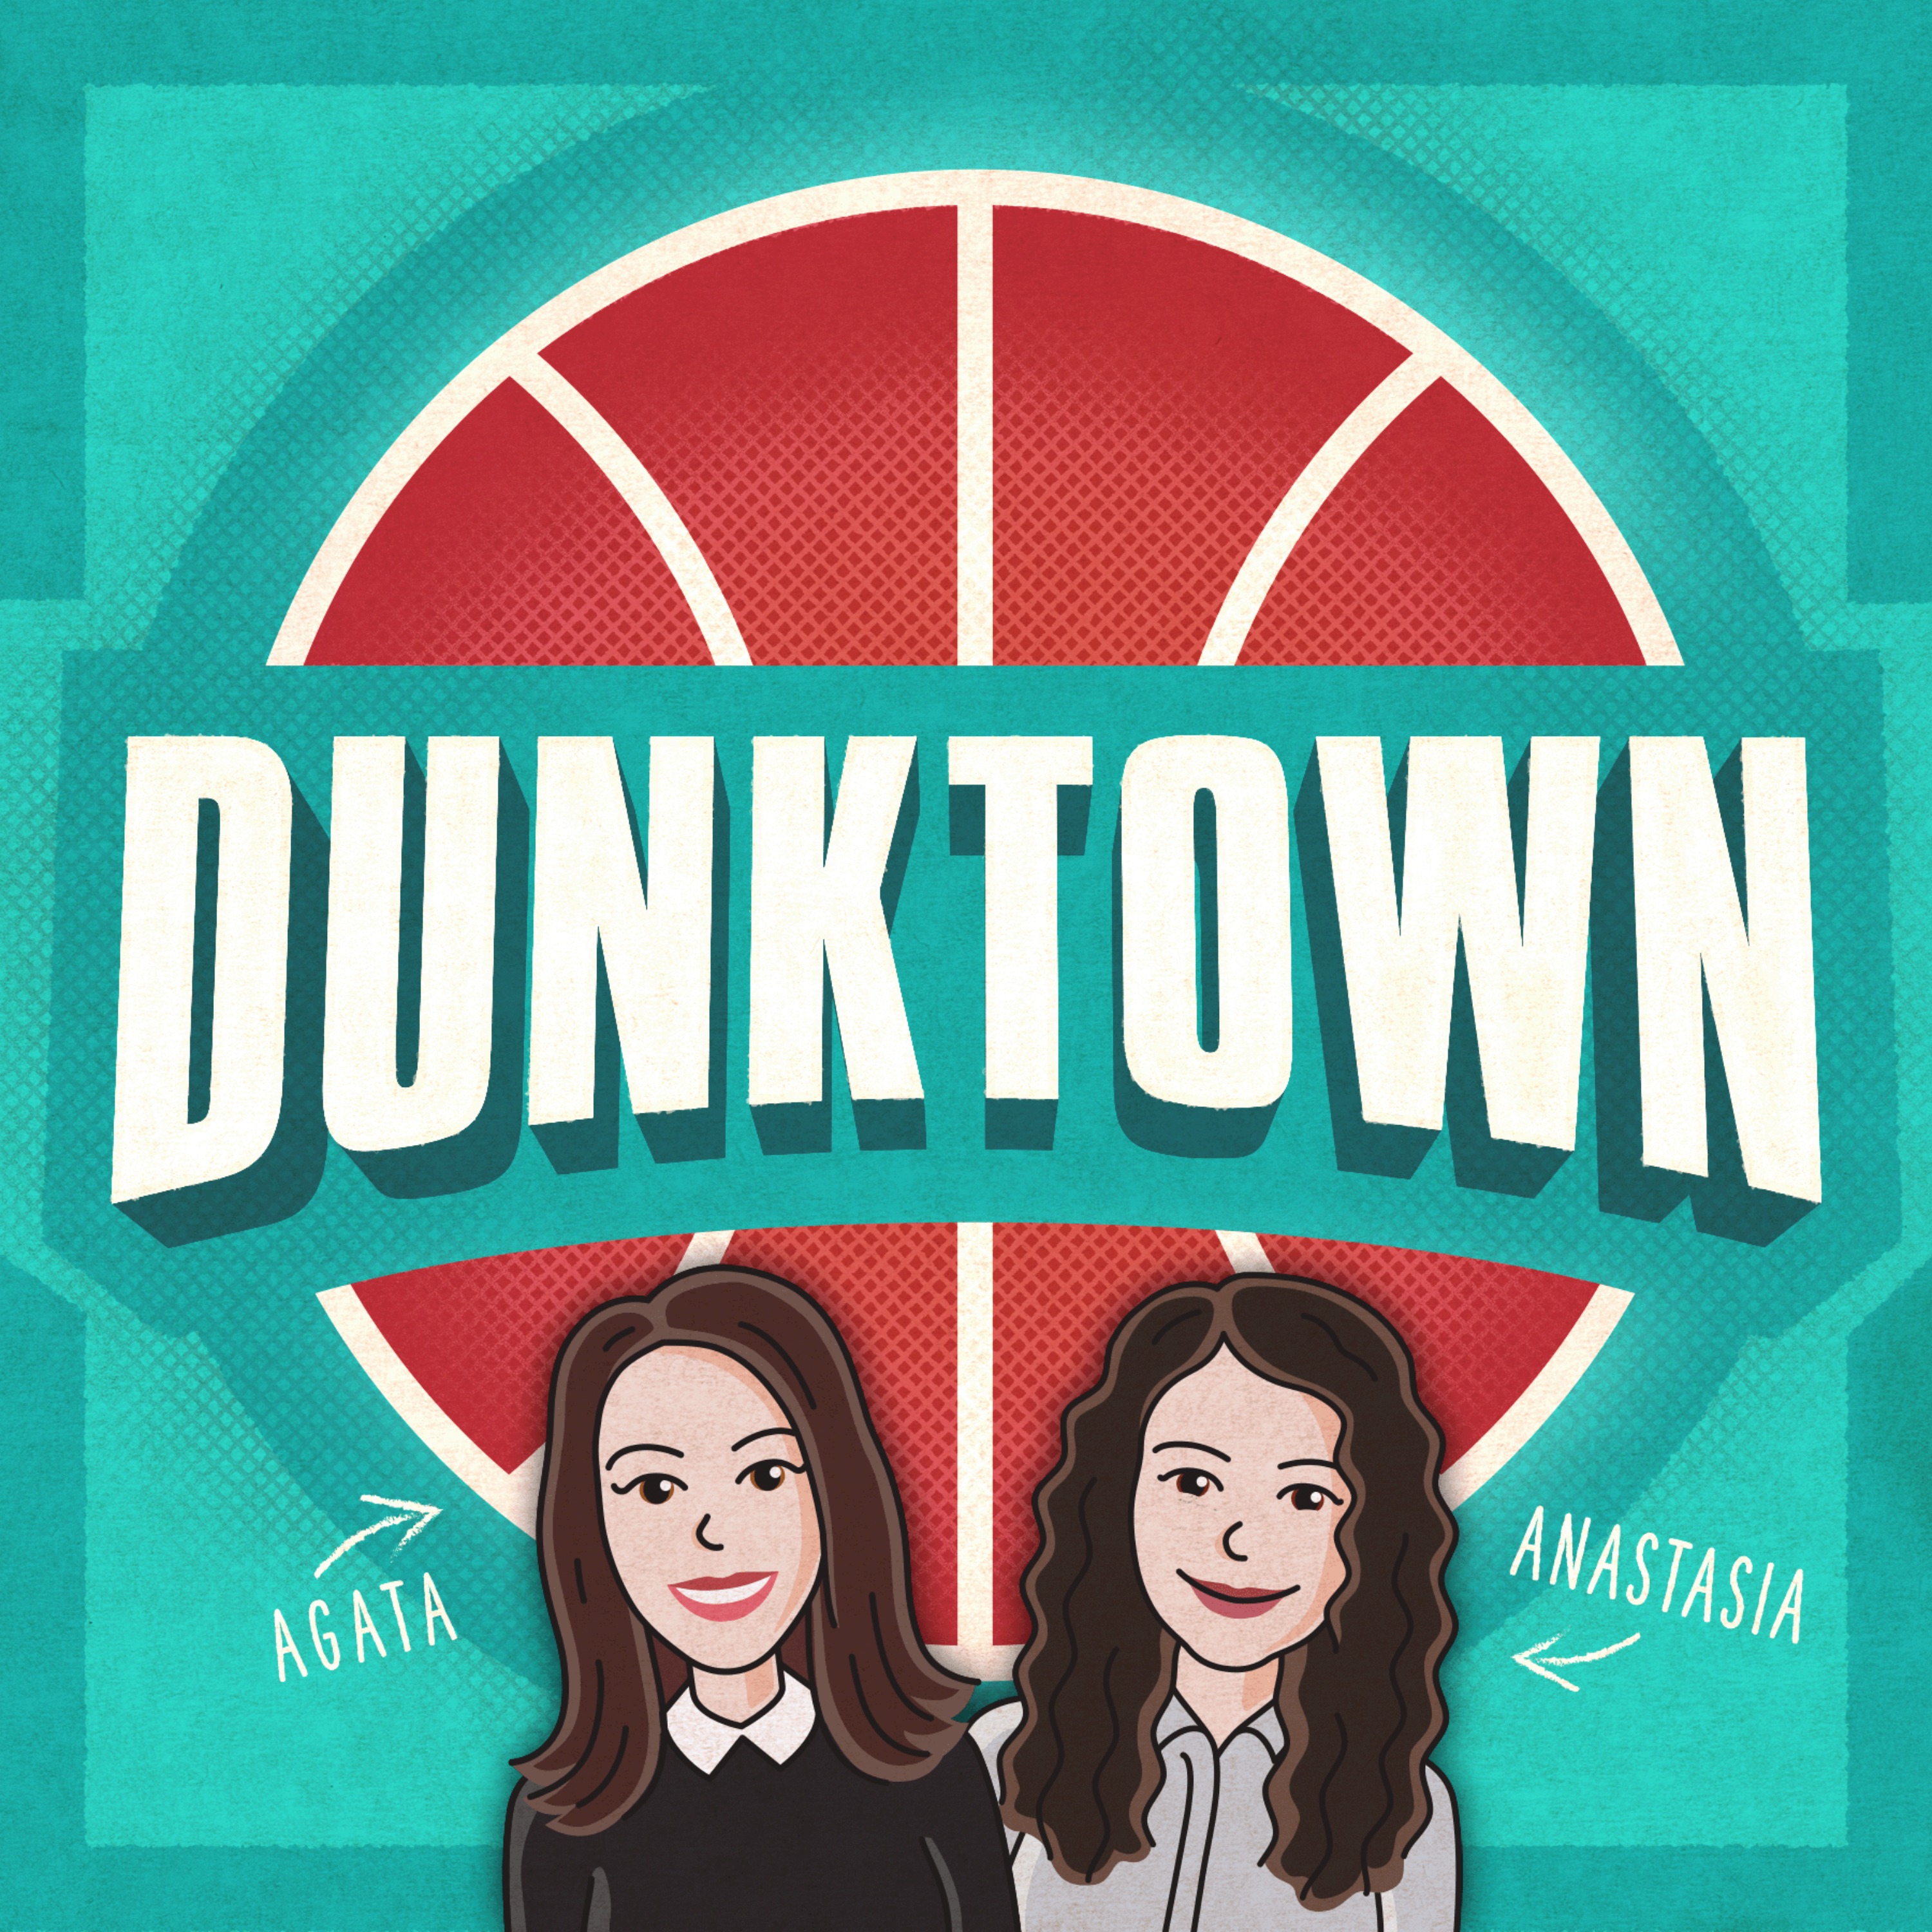 Dunktown podcast show image